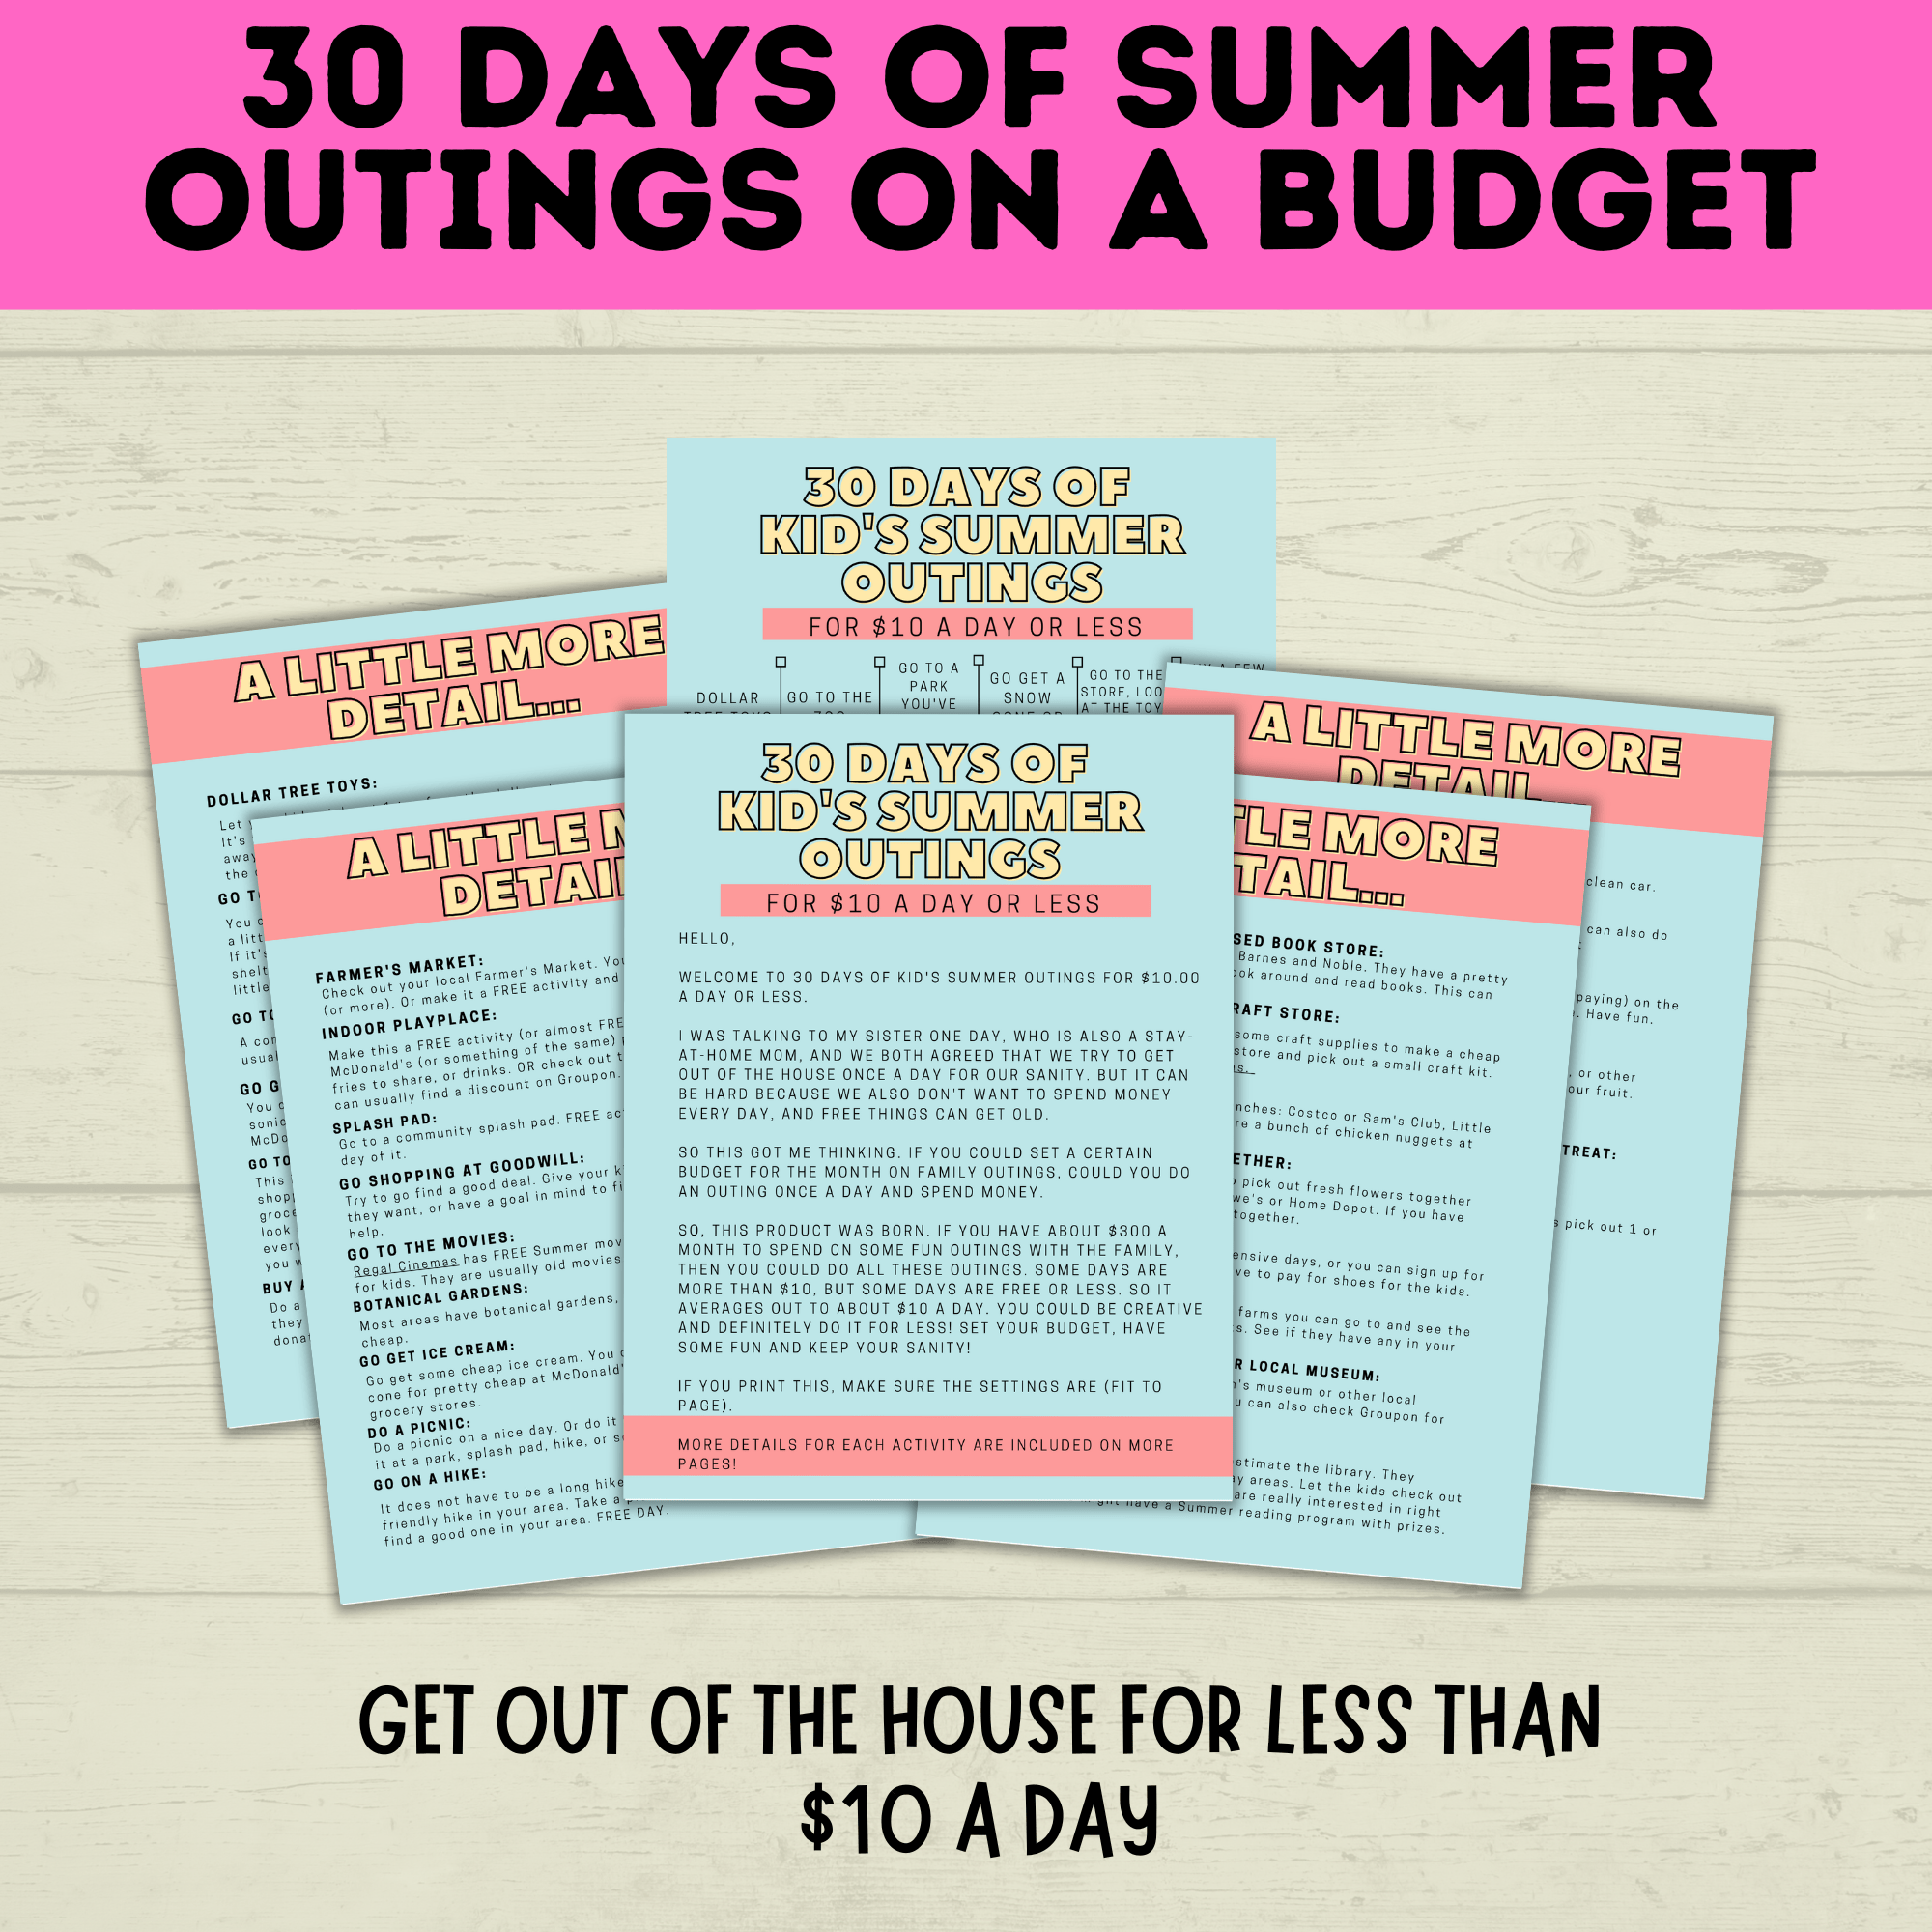 30 days of summer outings on a budget mockup image.